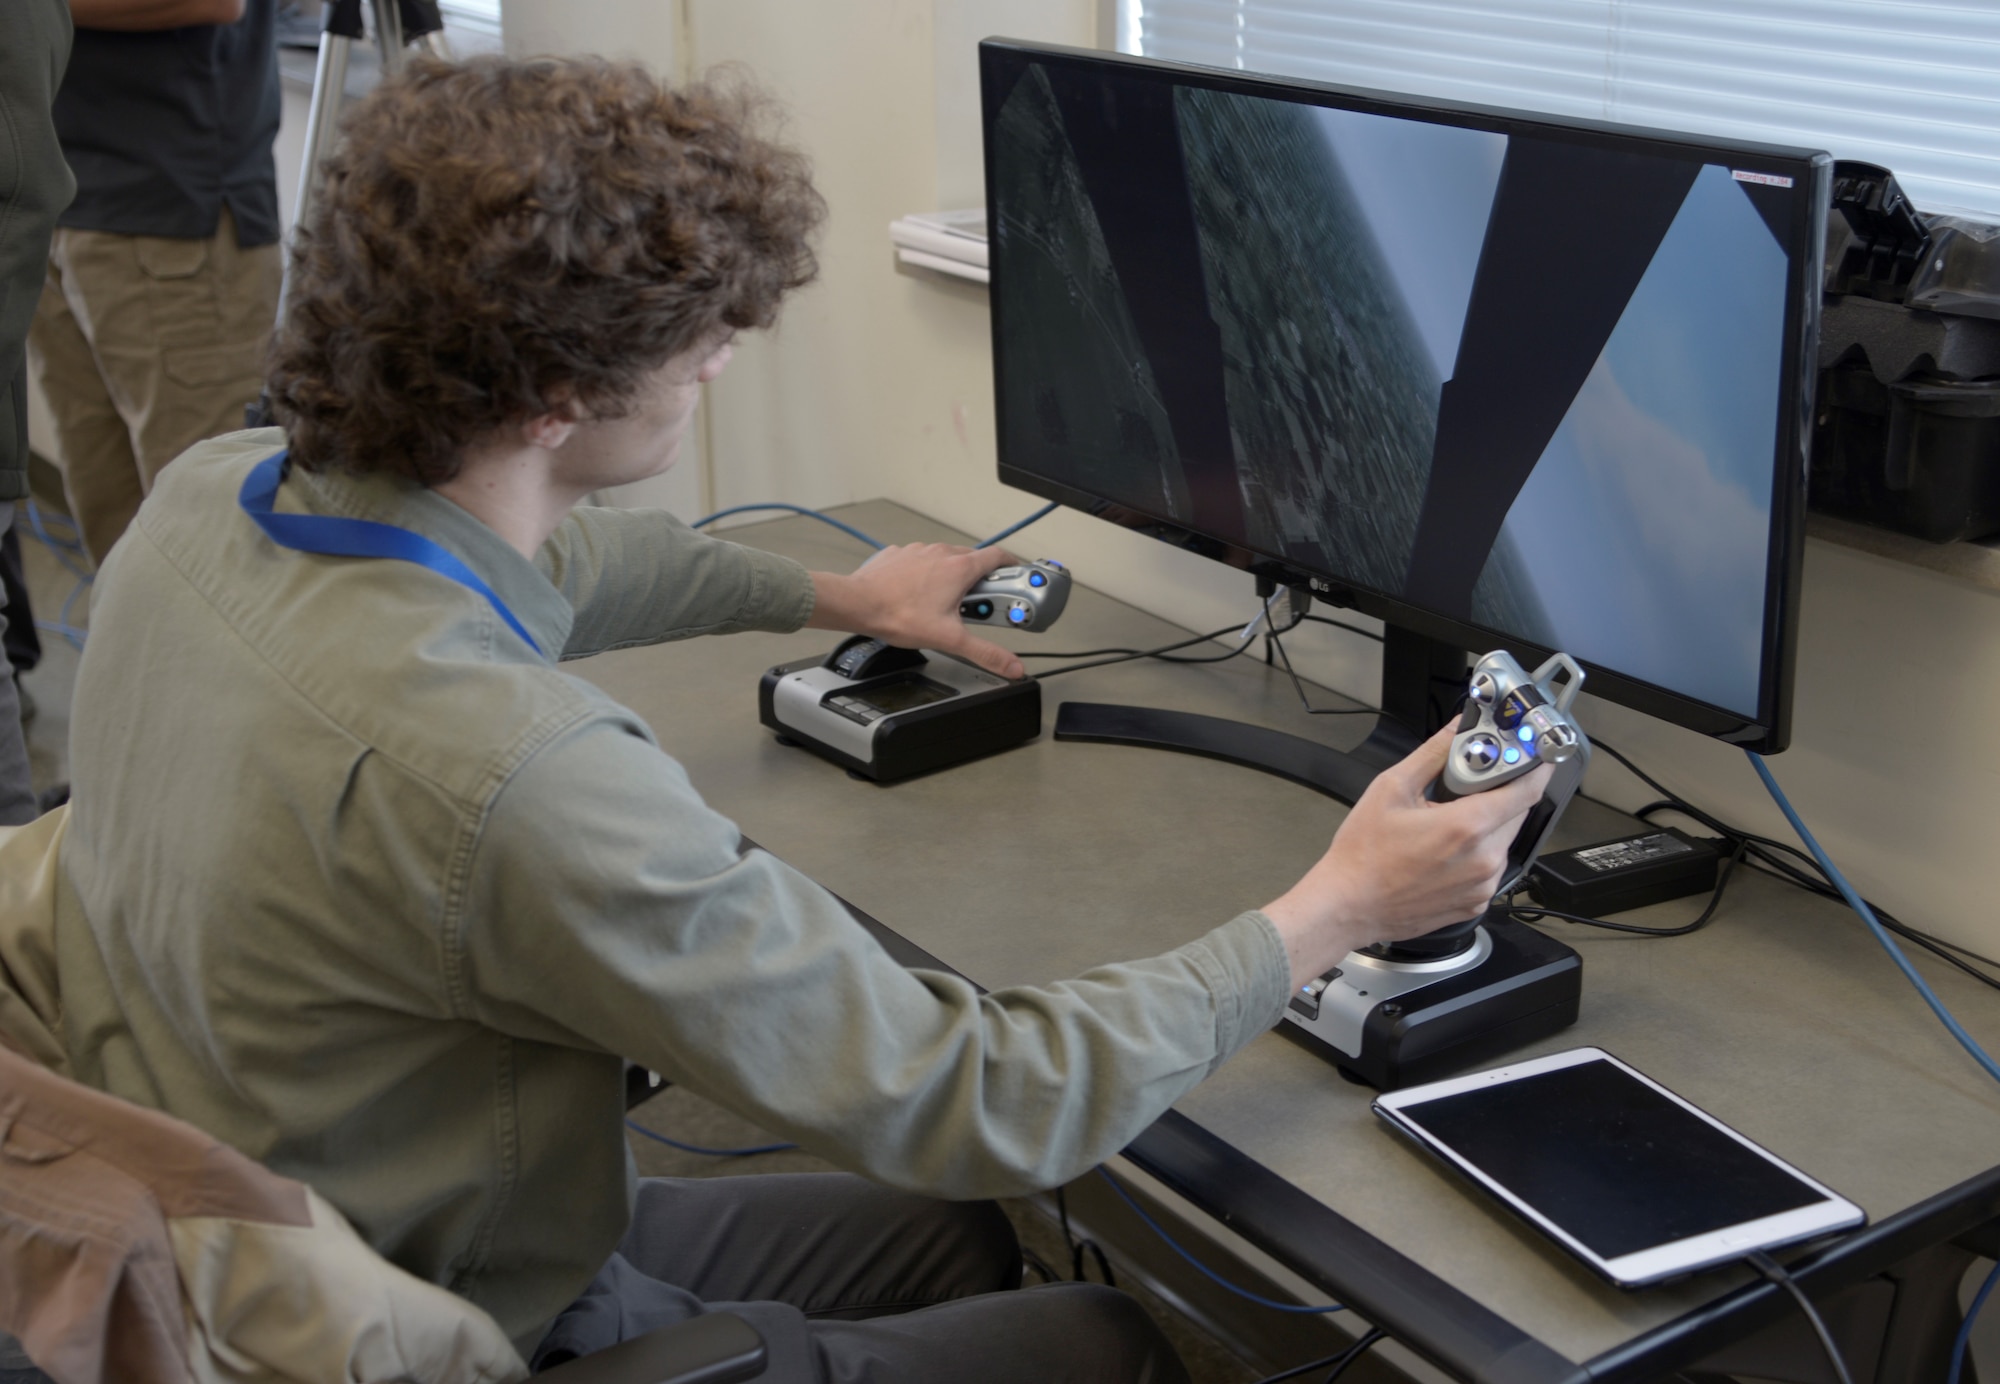 Bob Theimer, Air Force Research Laboratory software engineer, pilots a virtual aircraft to begin a demonstration using live, virtual and constructive elements into one training environment.  During a training scenario, people are physically operating equipment in real time parallel to the identically matched scenario with a computer-generated environment. (U.S. Air Force photo/John VanWinkle)